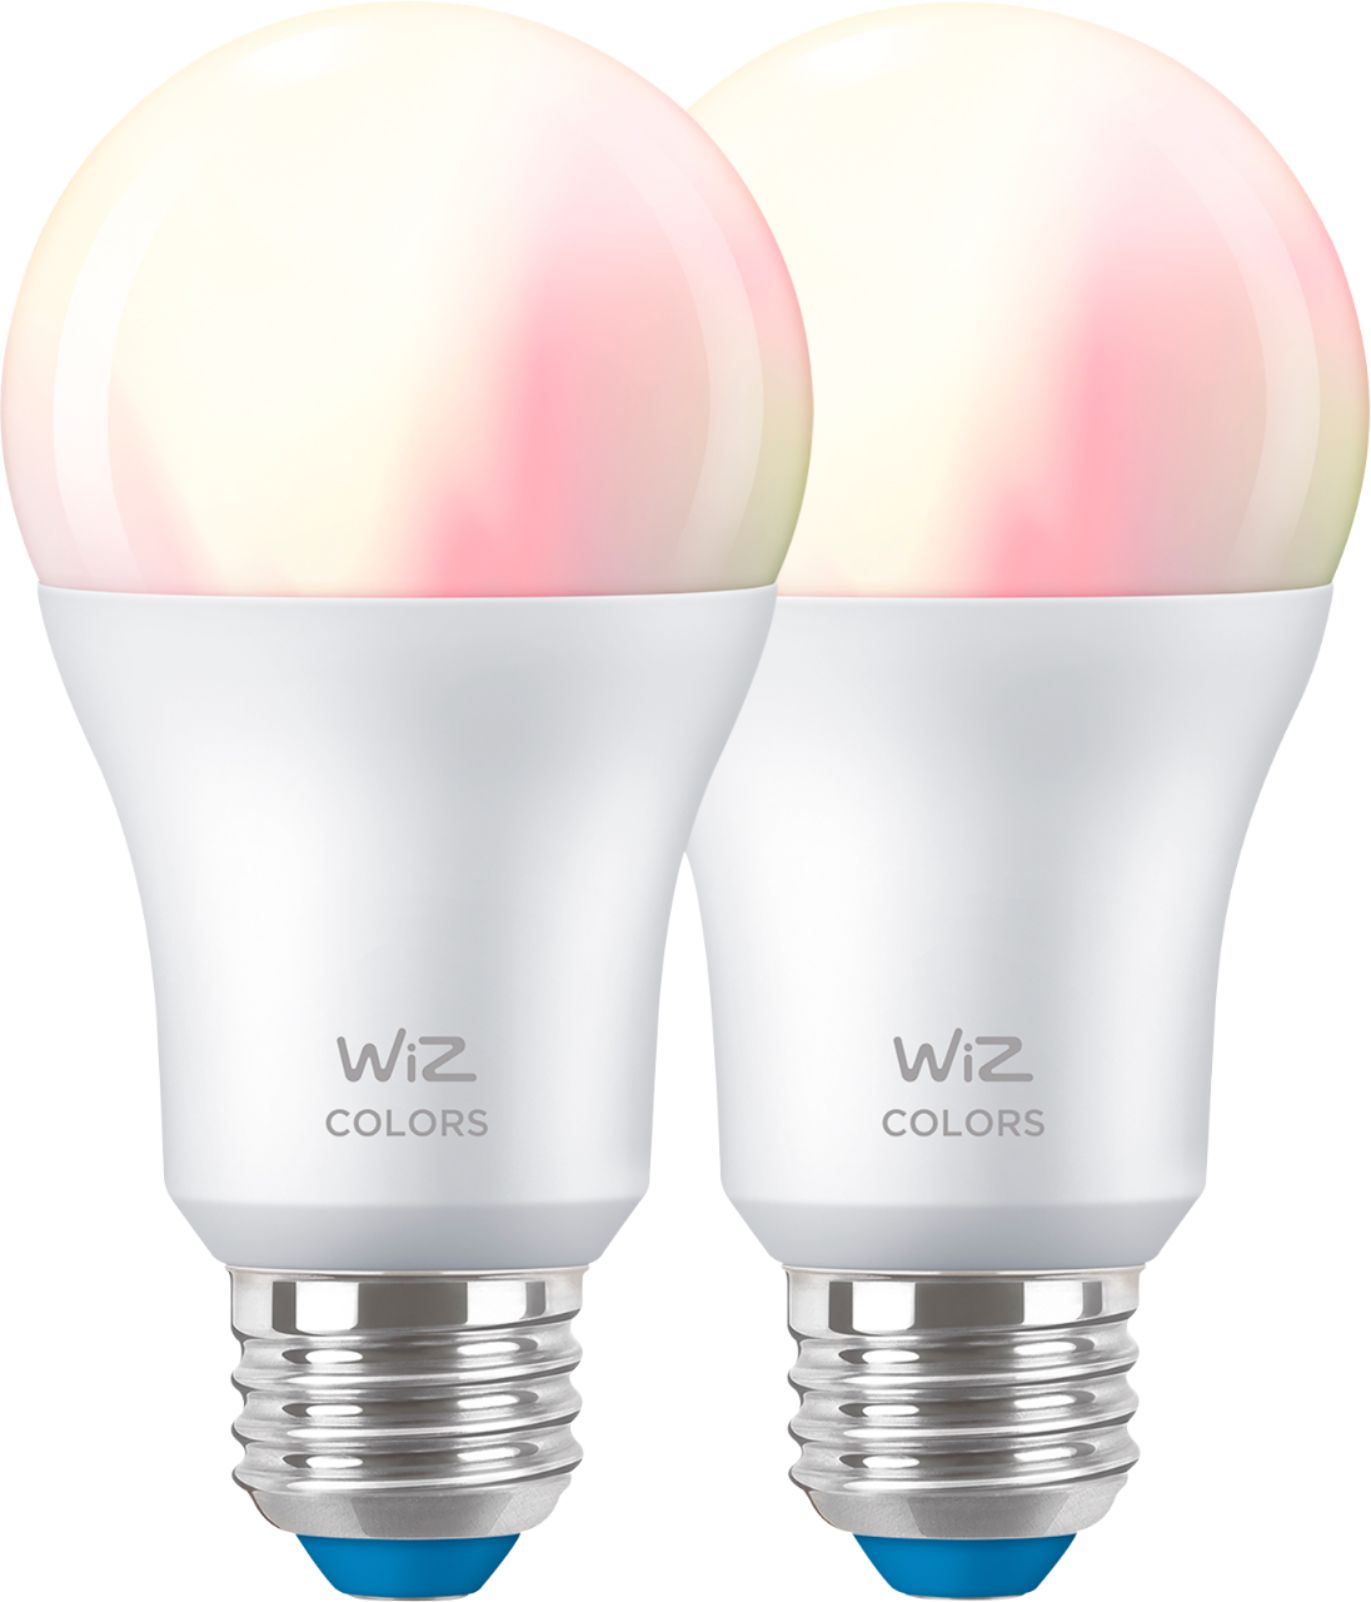 Wiz Connected Color Bulbs 2 Pack